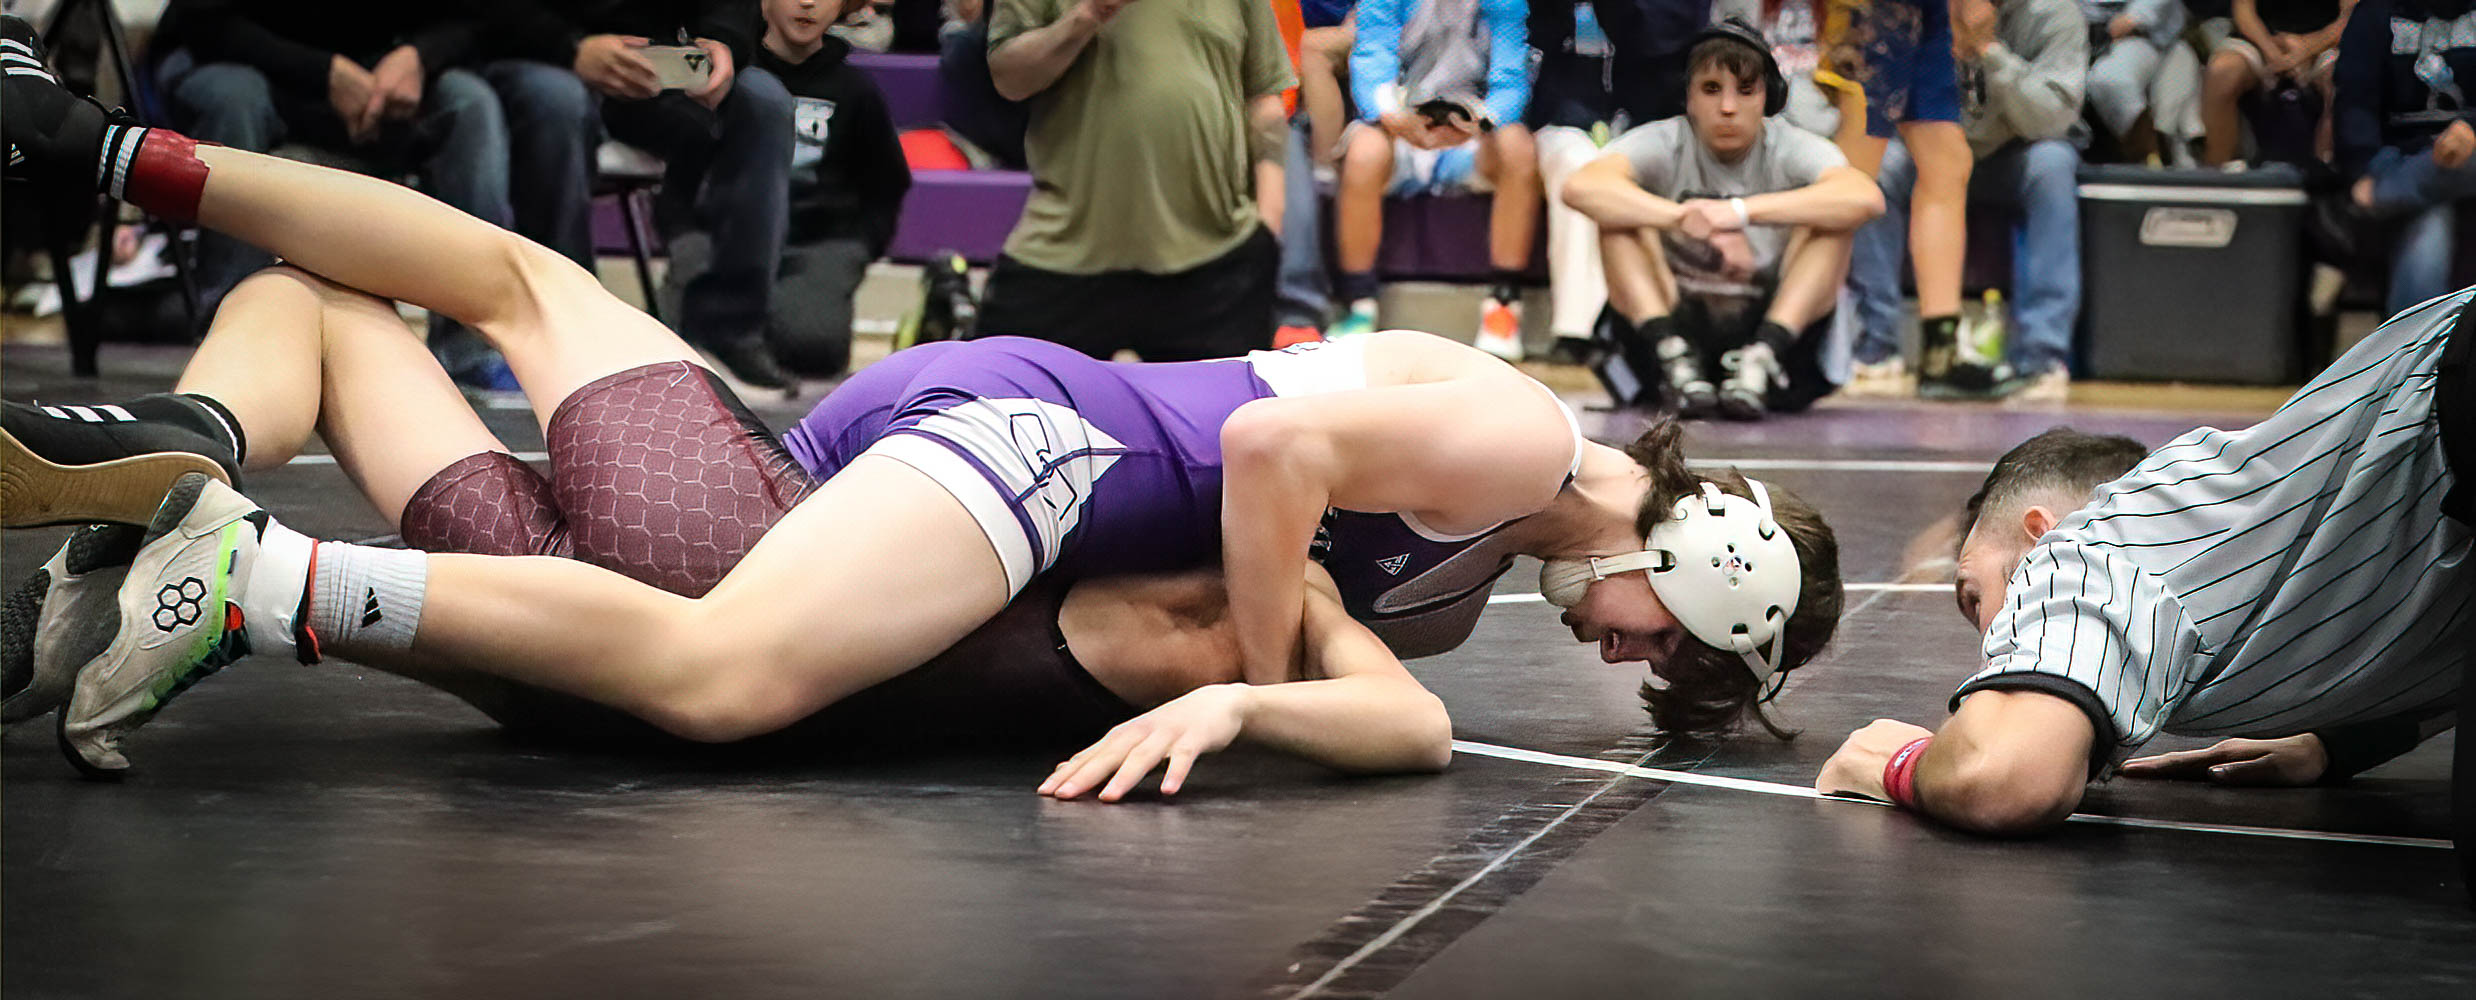 Just that quick, Dominguez gets the better of Rouleau and pins him in 44 seconds.